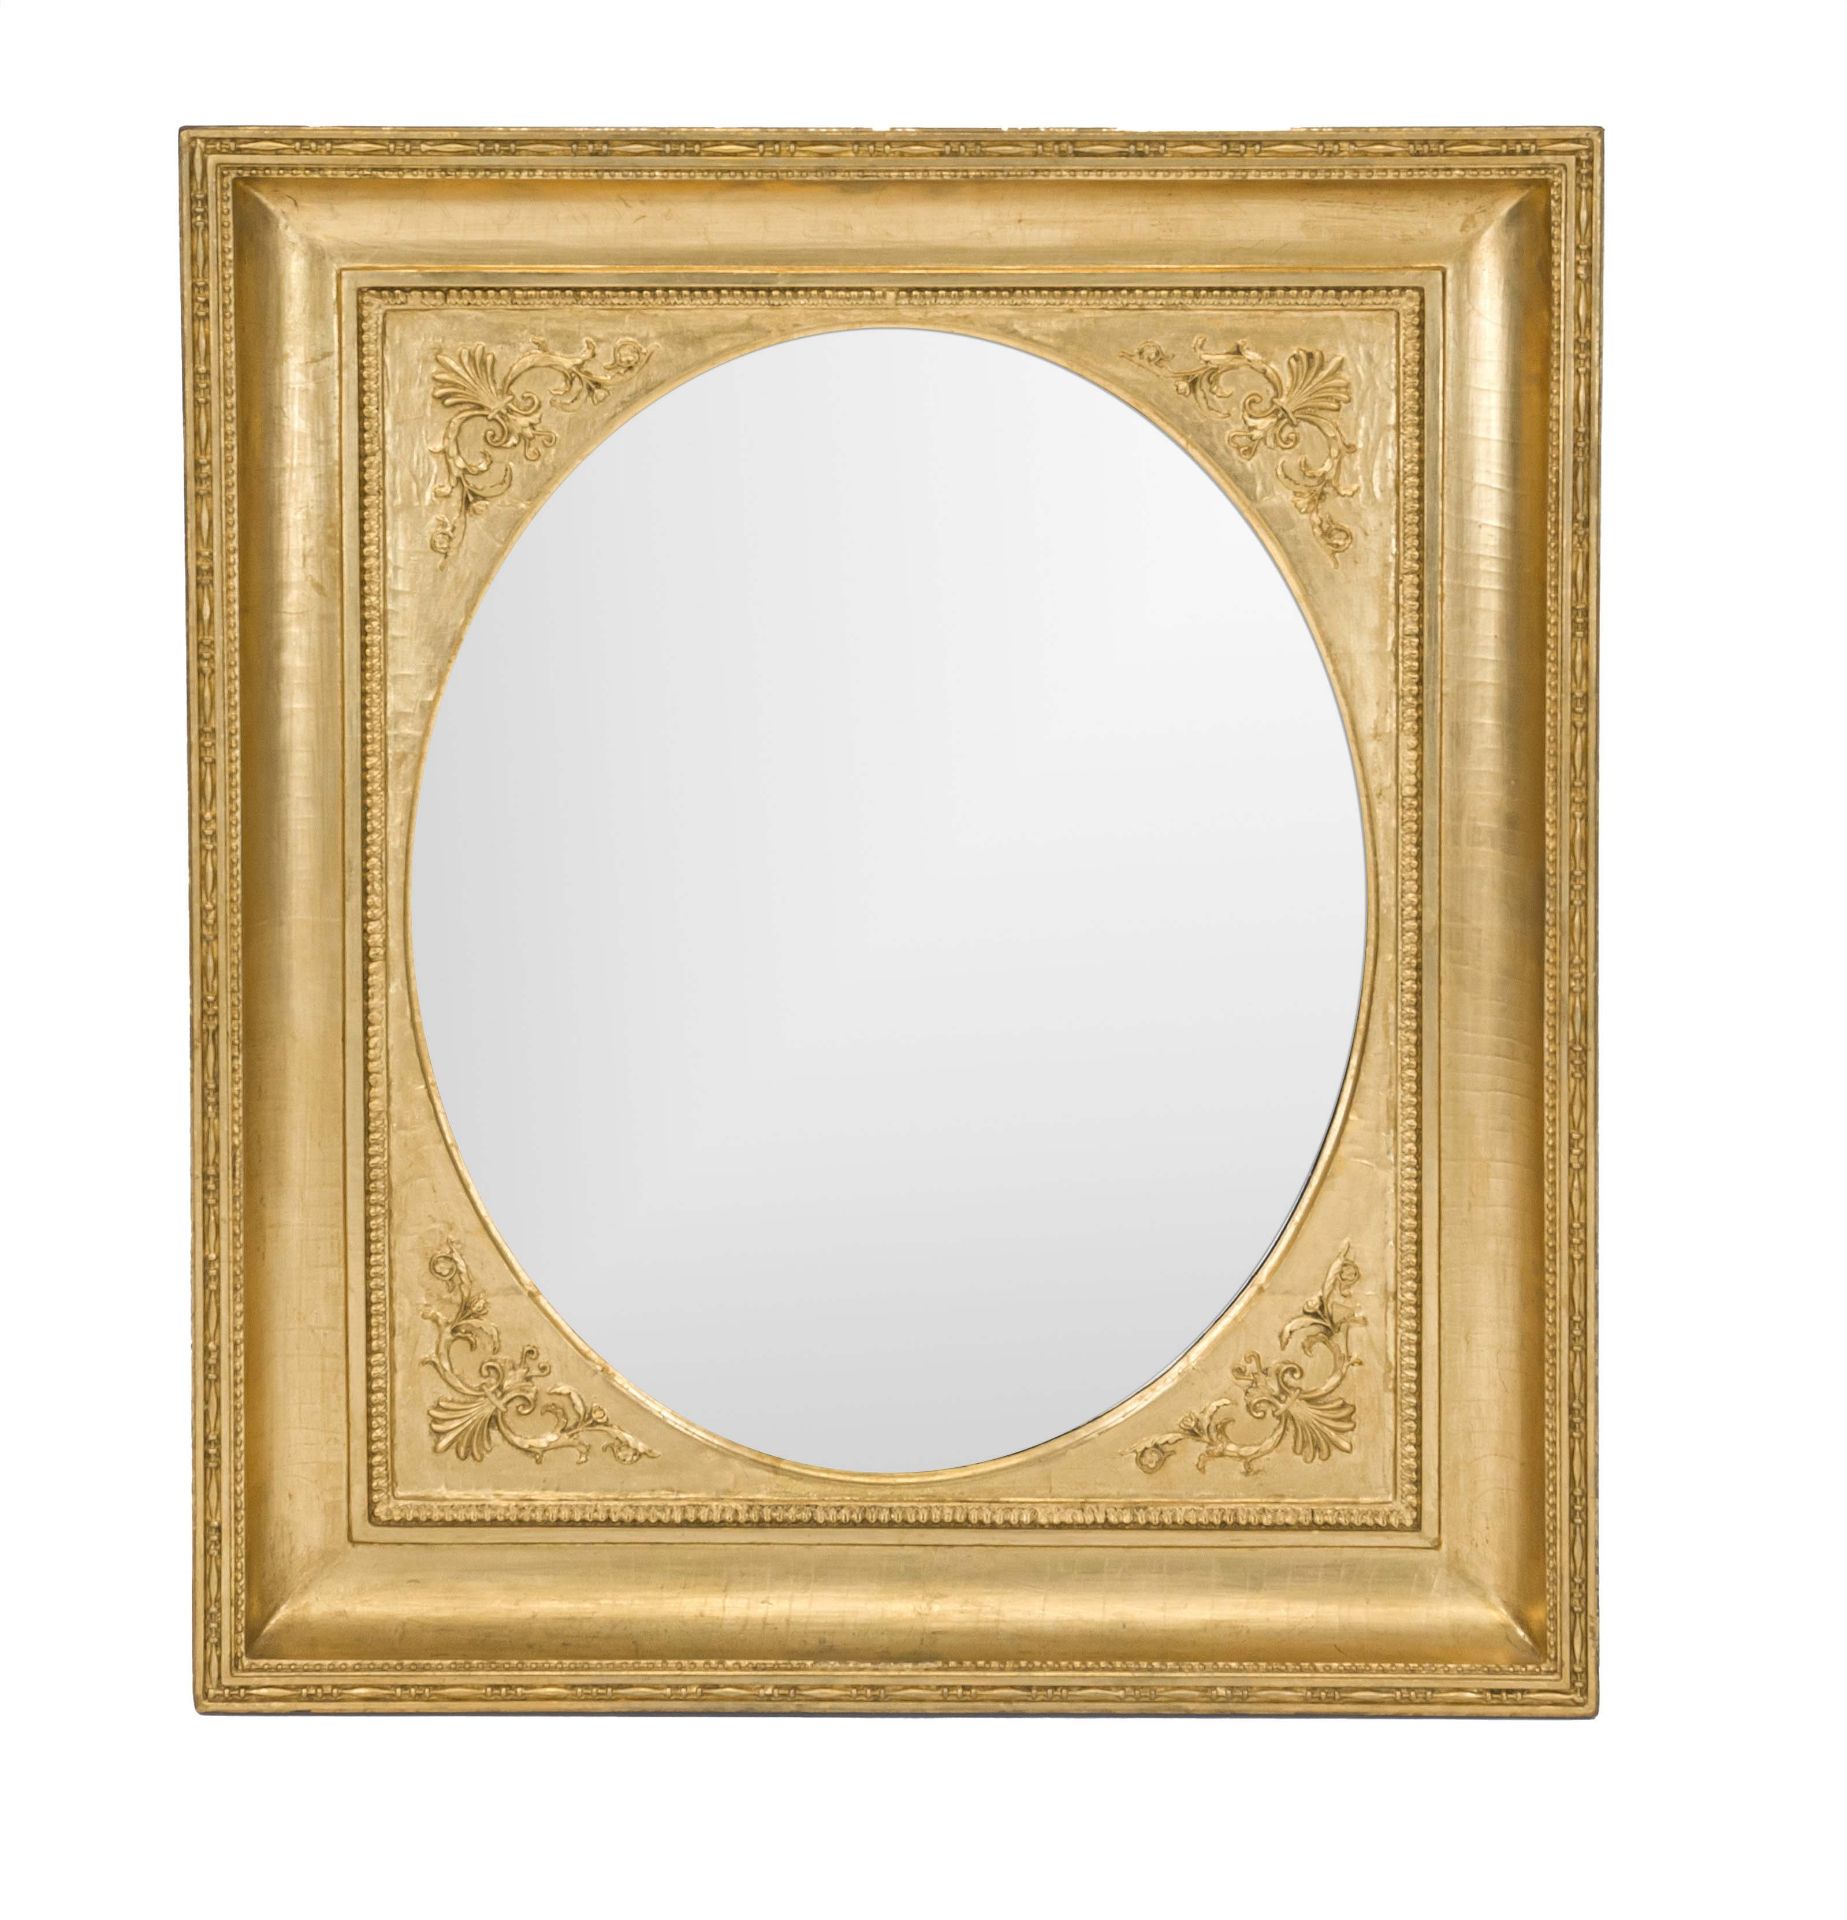 Wall mirror, 19th century, stuccoed and gilded wood, 84 x 72 cm